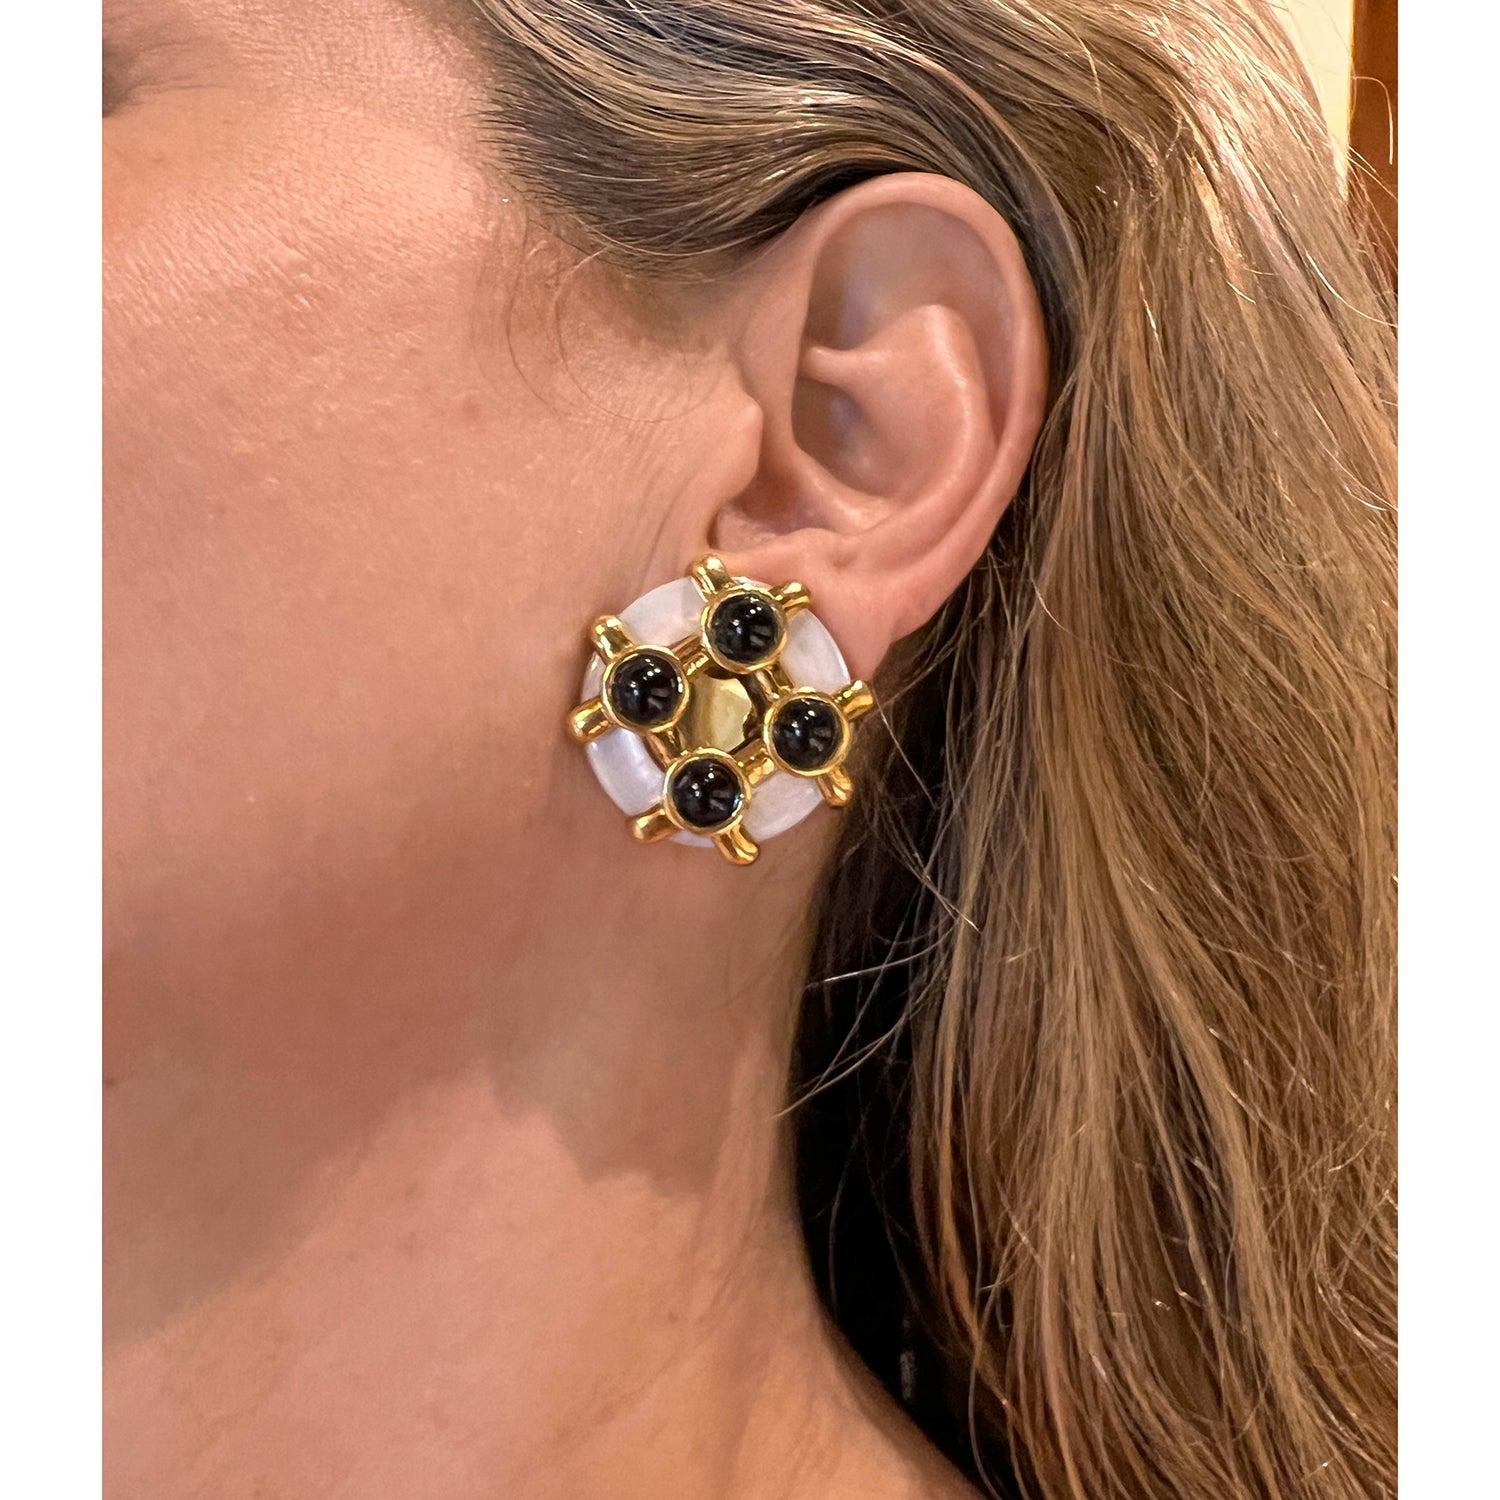 Designed by Aldo Cipullo for Cartier in 1972, these 18k yellow gold earrings feature a raised gold lattice pattern over carved mother-of-pearl accented by four round cabochon-cut black onyx. Clip backs (posts may be added upon customer request).